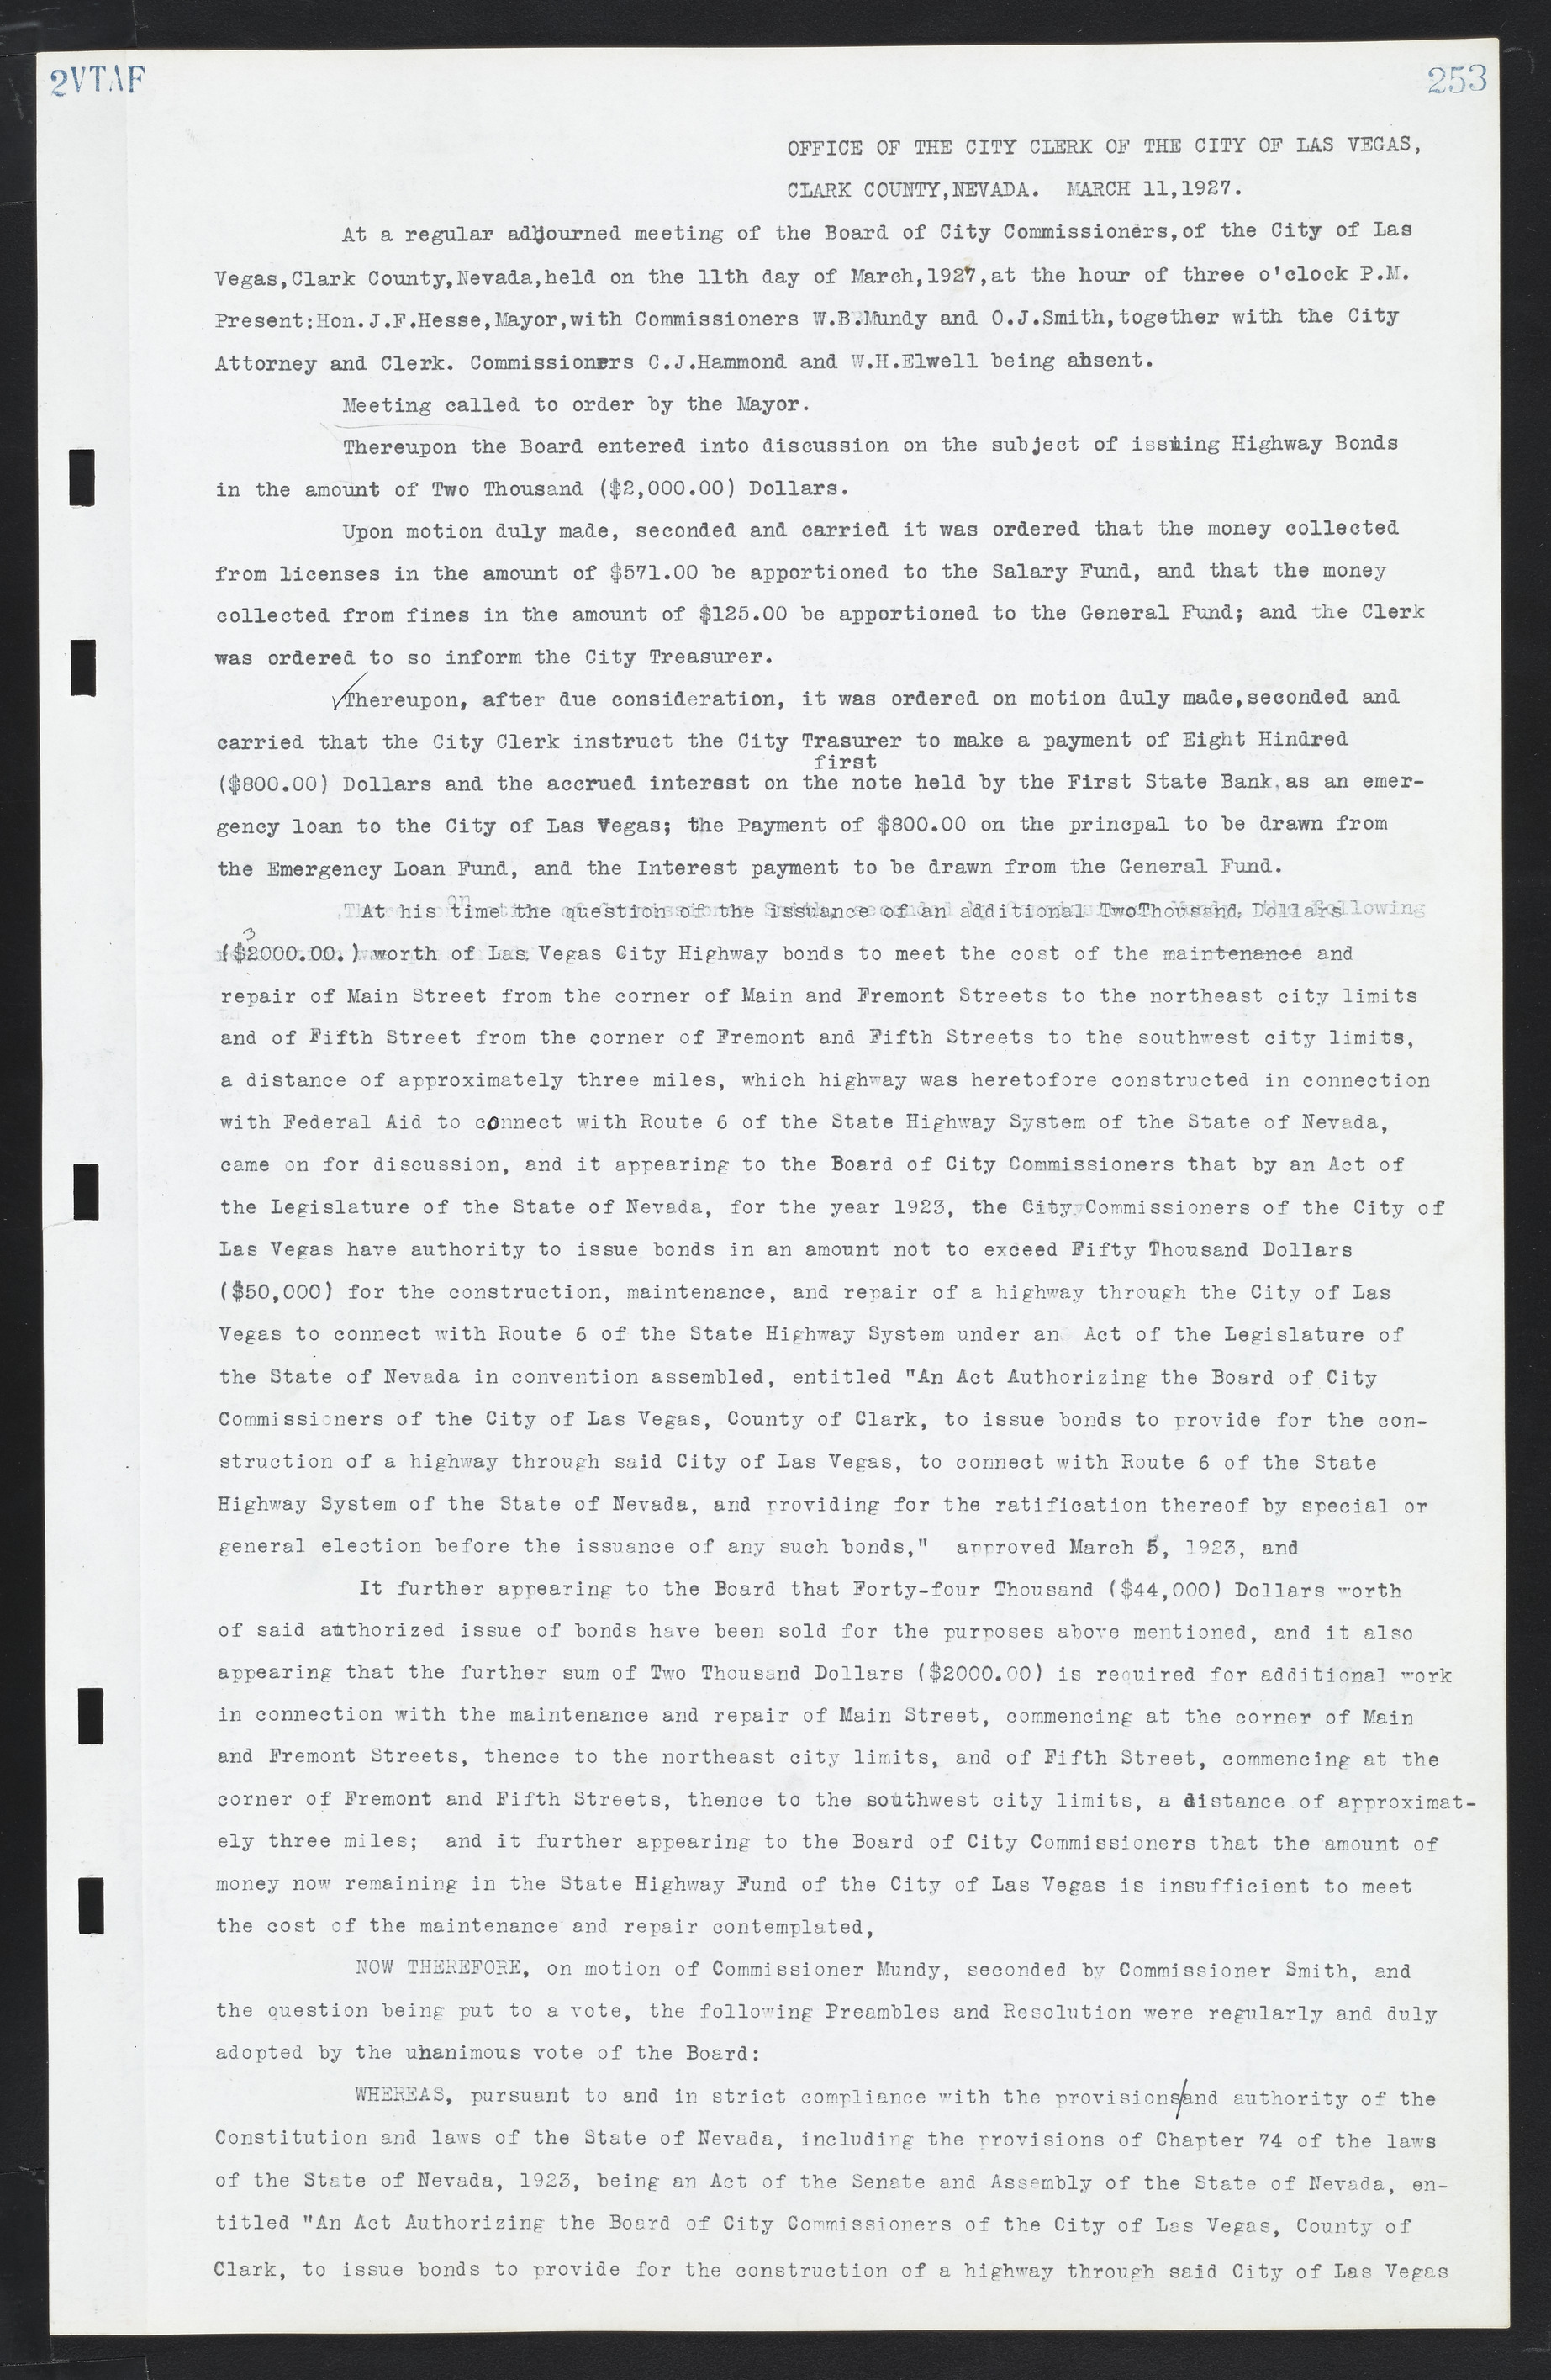 Las Vegas City Commission Minutes, March 1, 1922 to May 10, 1929, lvc000002-262